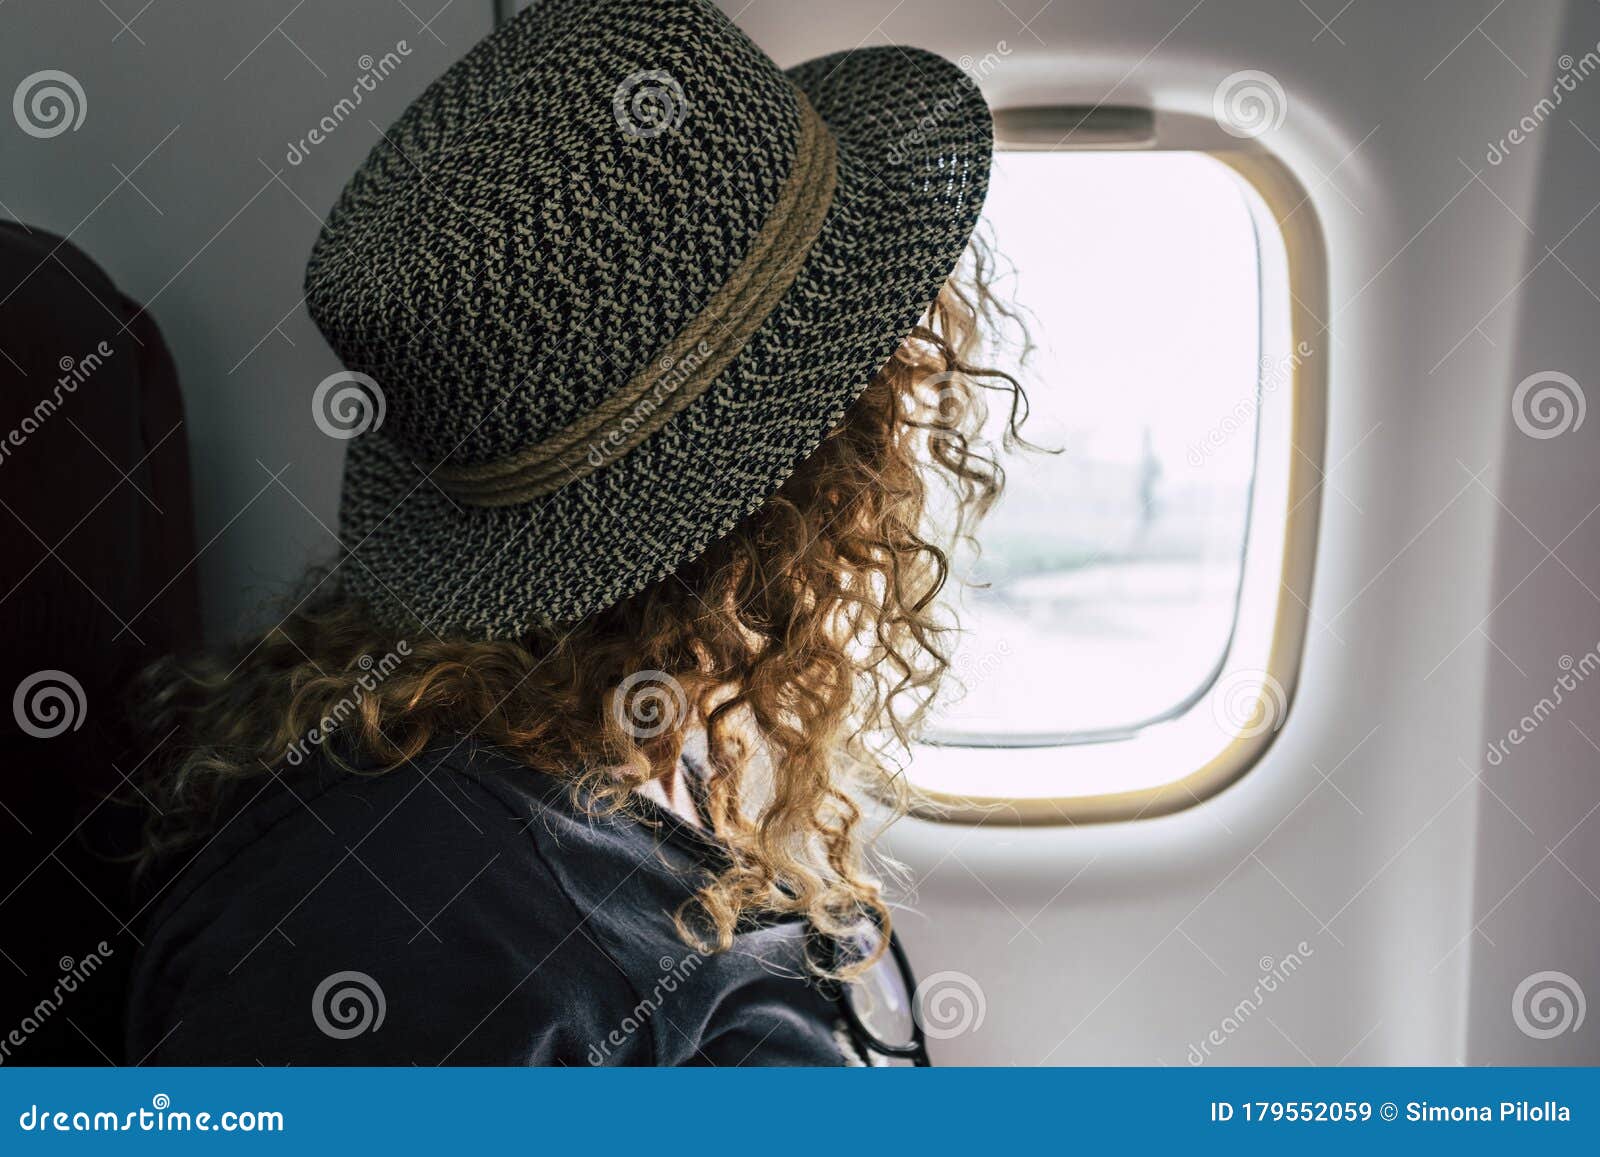 woman travel on aircraft flight - fly for business or holiday vacation people inside airplane looking outside from the window -